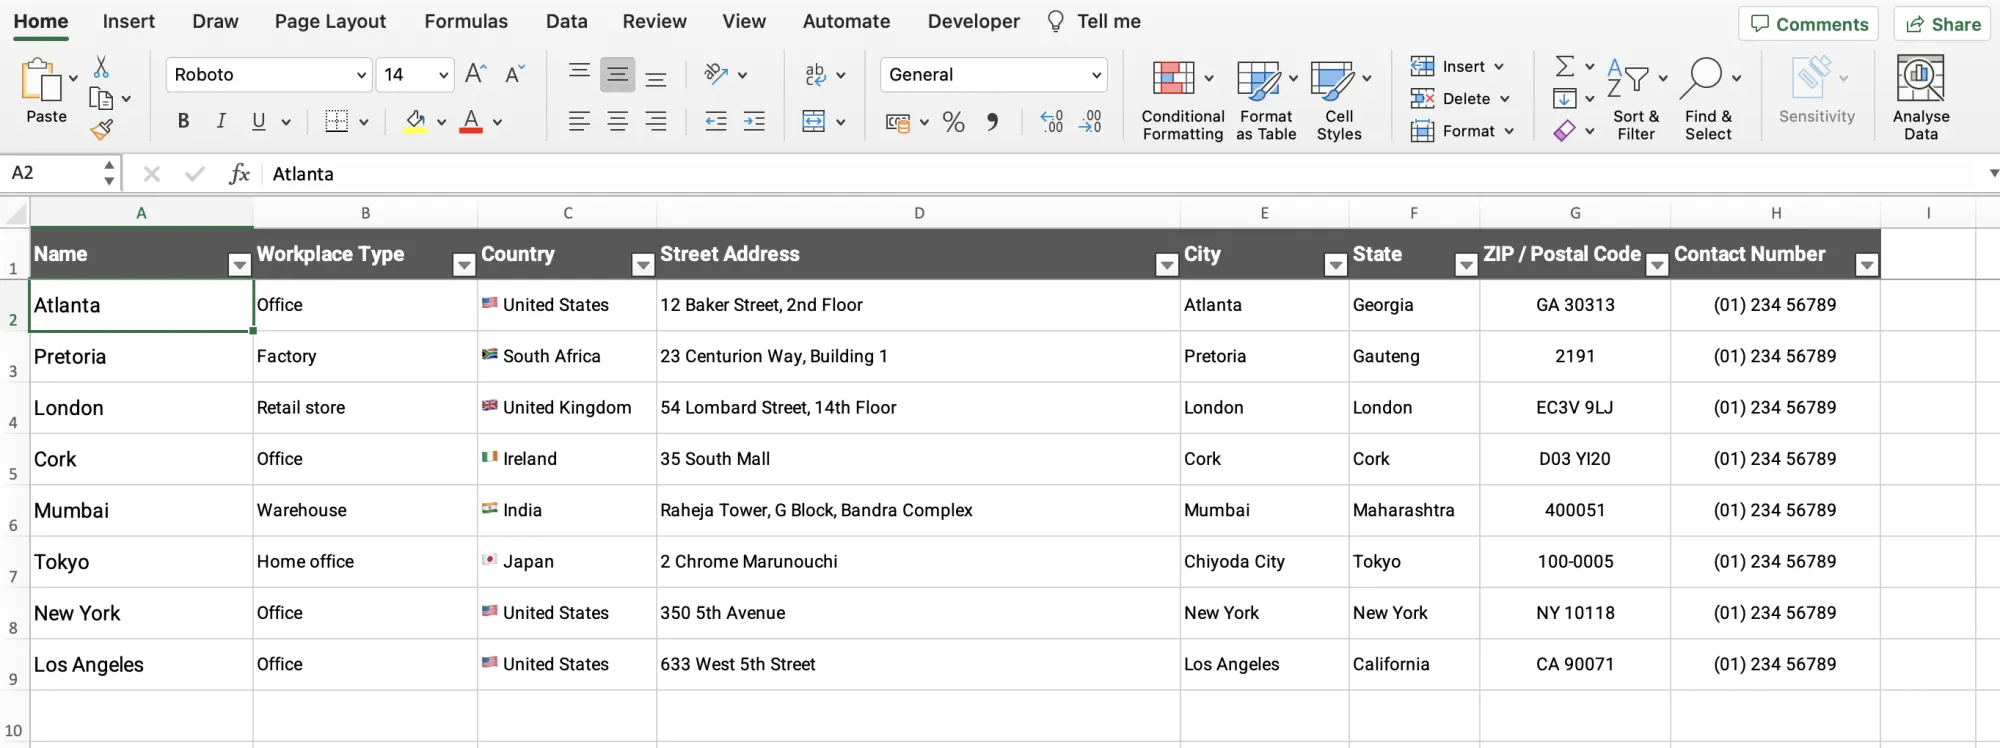 Excel workplace directory